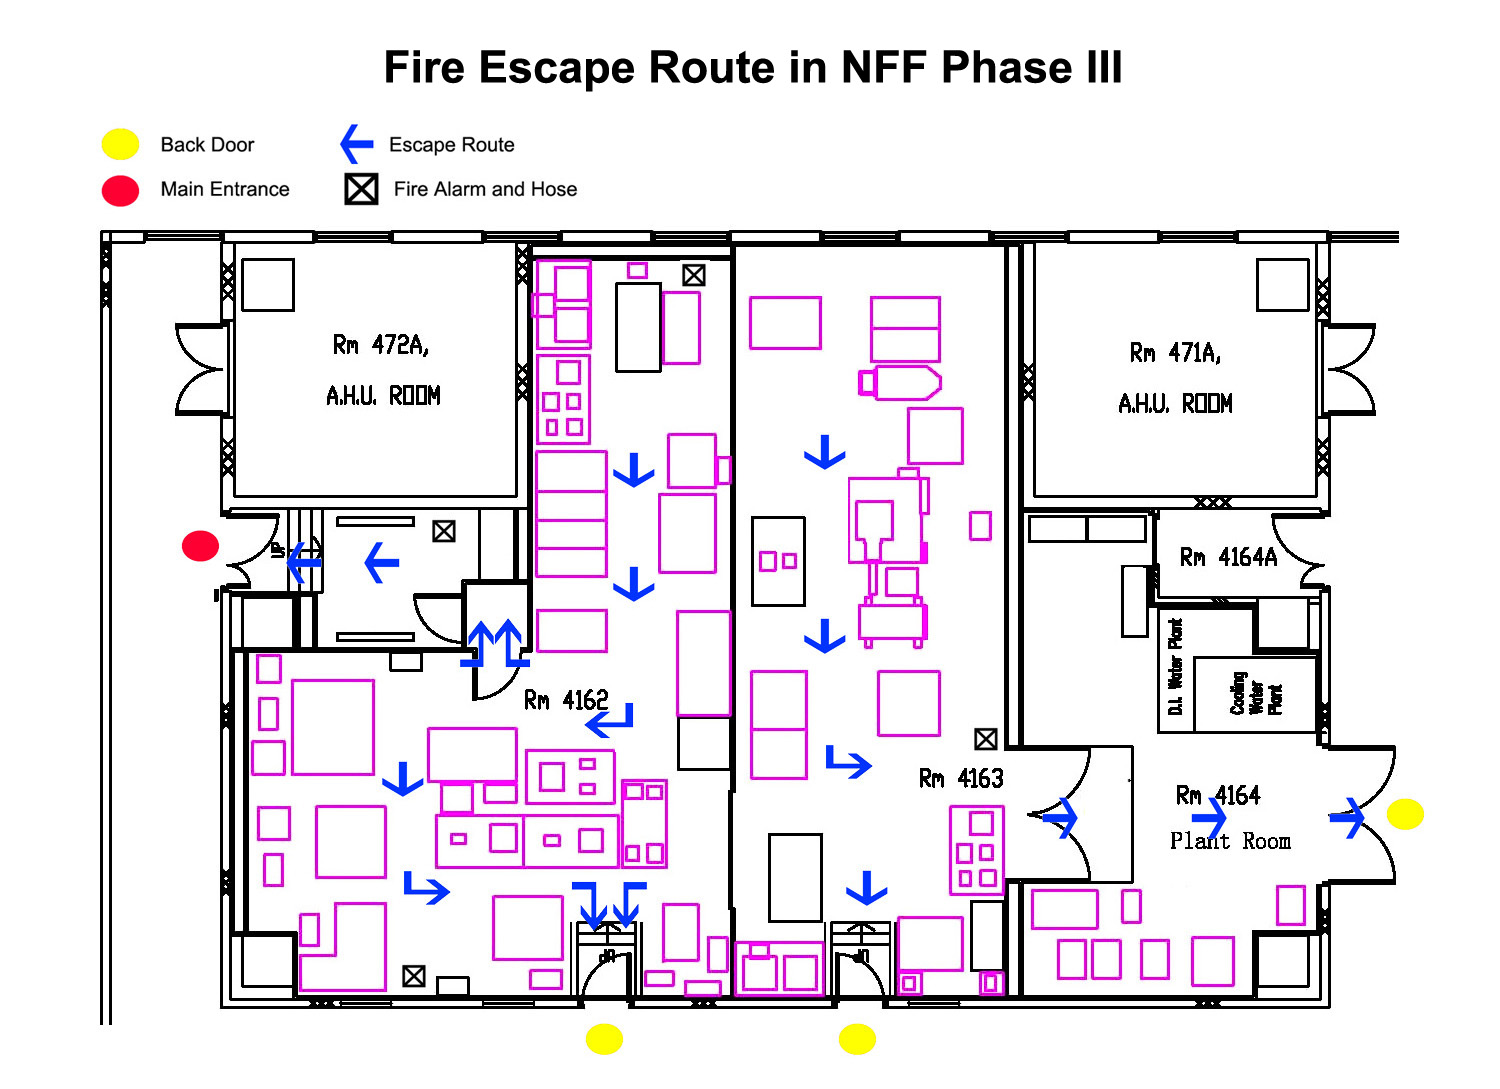 Fire Escape Route in NFF Phase III